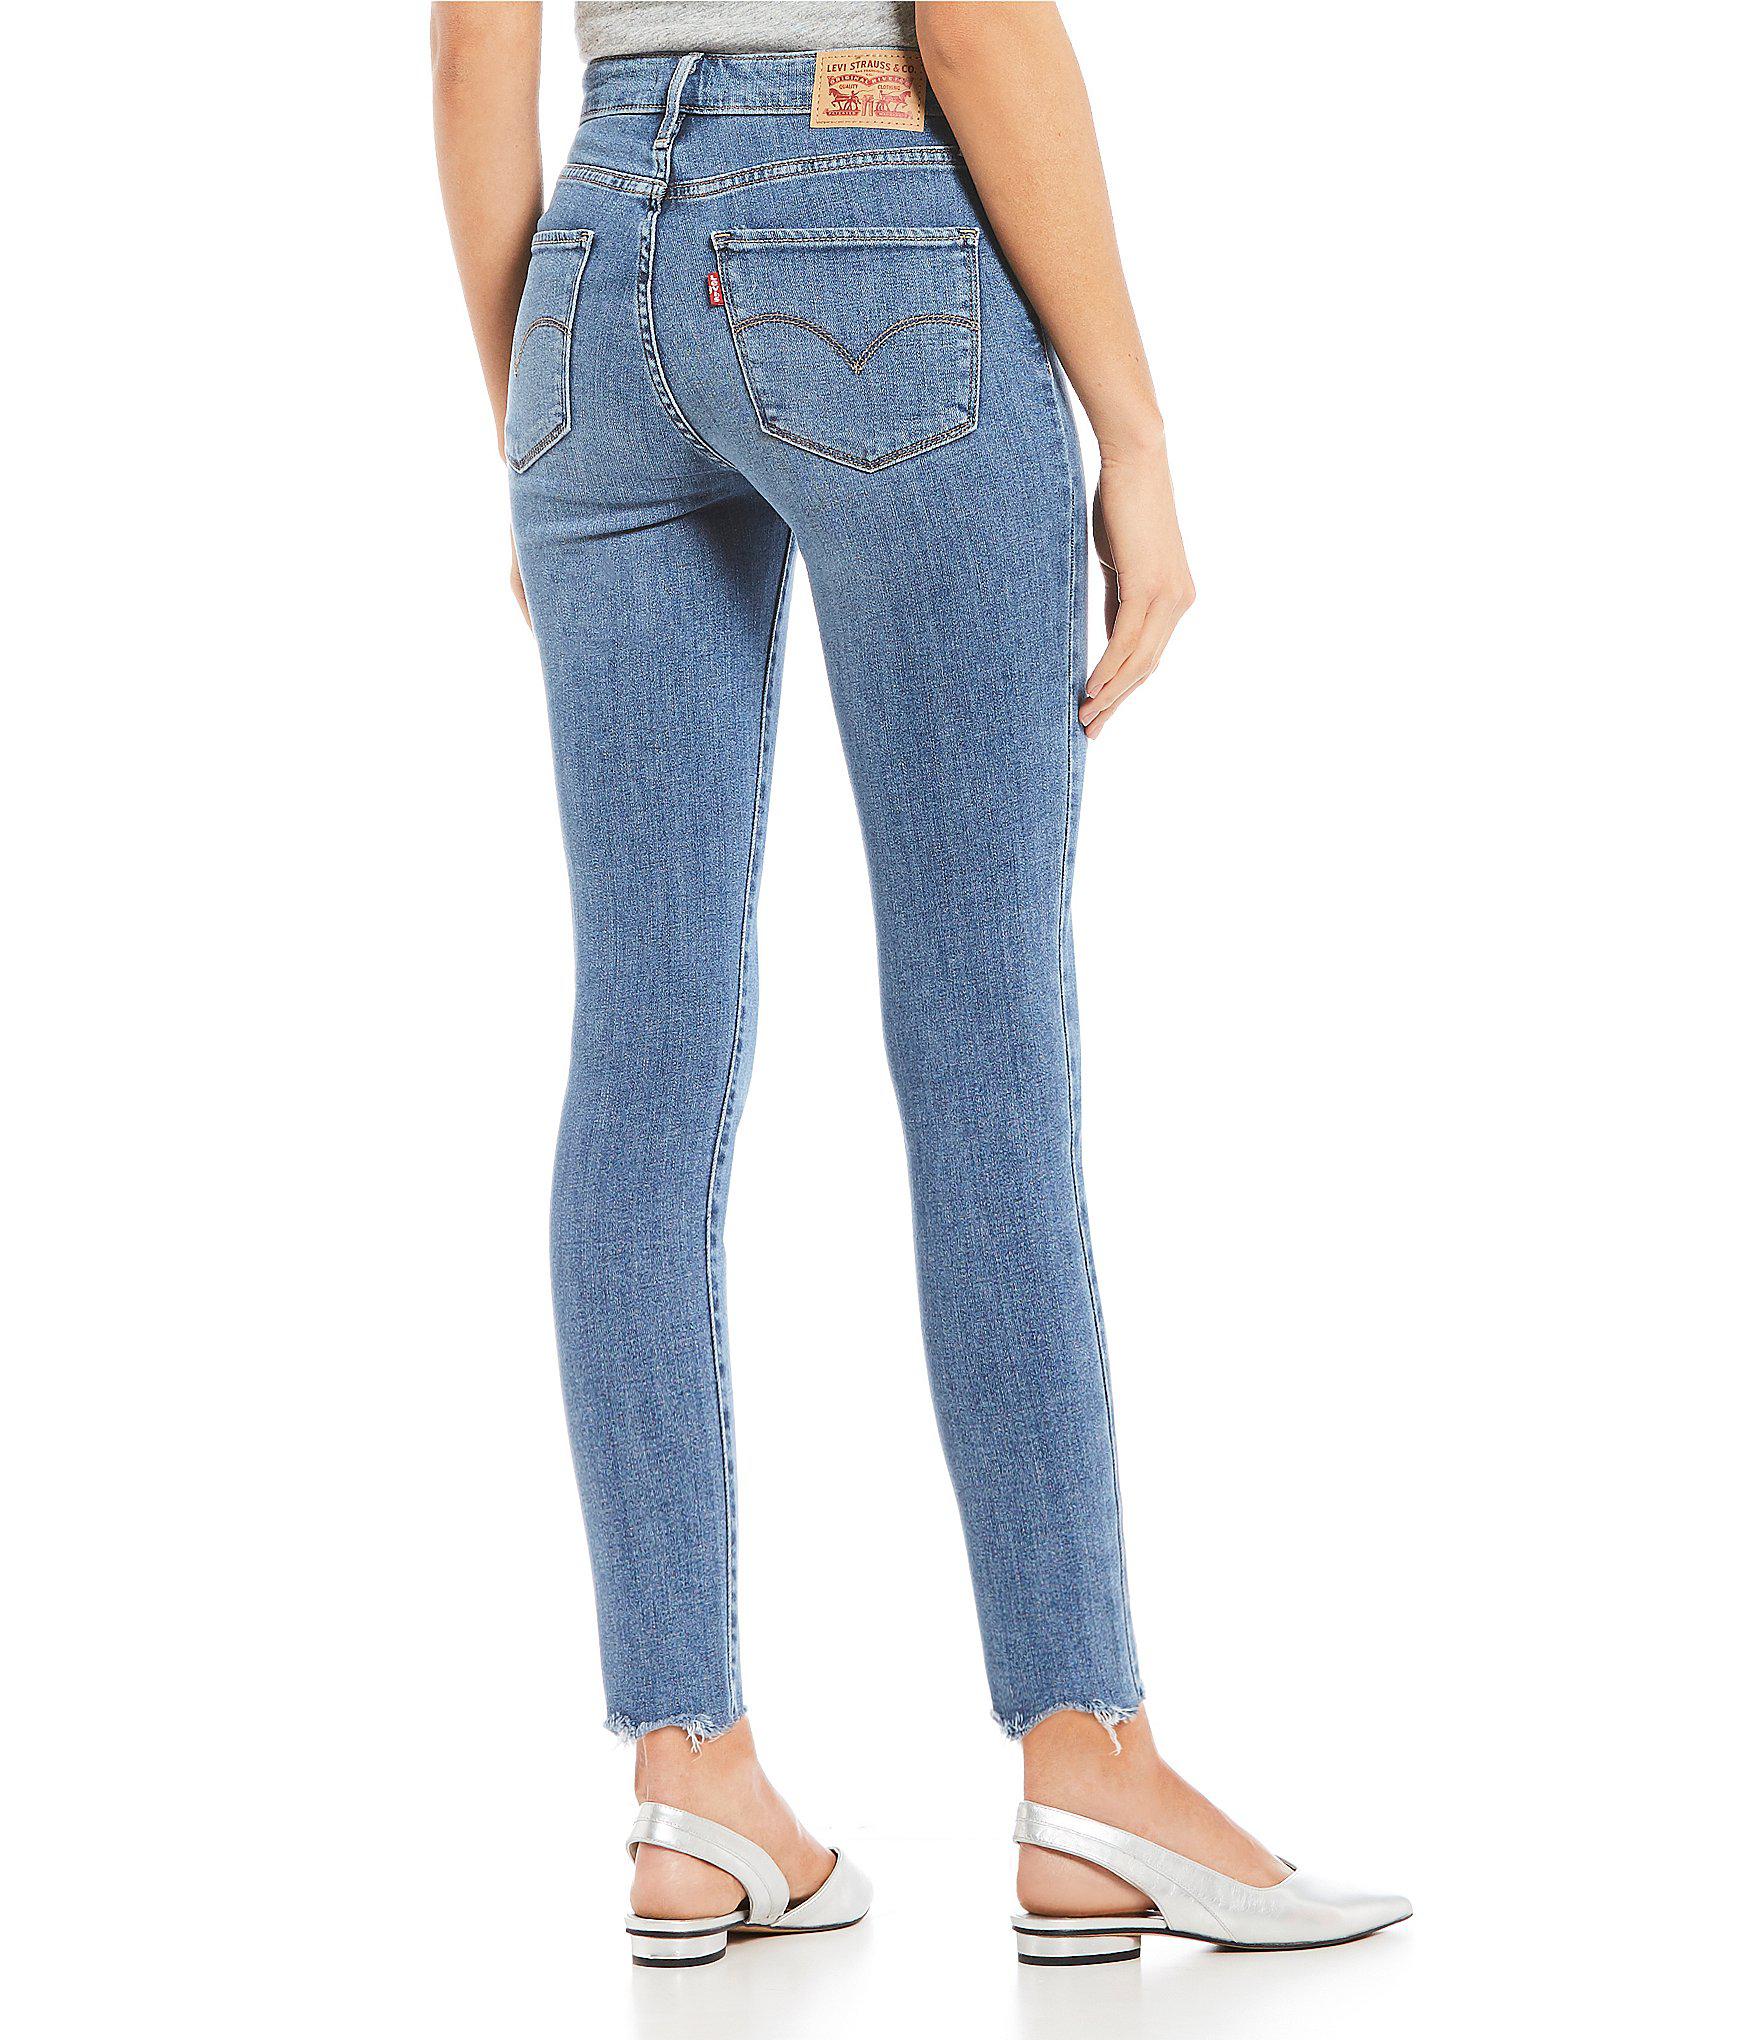 levi's high rise skinny ankle jeans Cheaper Than Retail Price> Buy  Clothing, Accessories and lifestyle products for women & men -